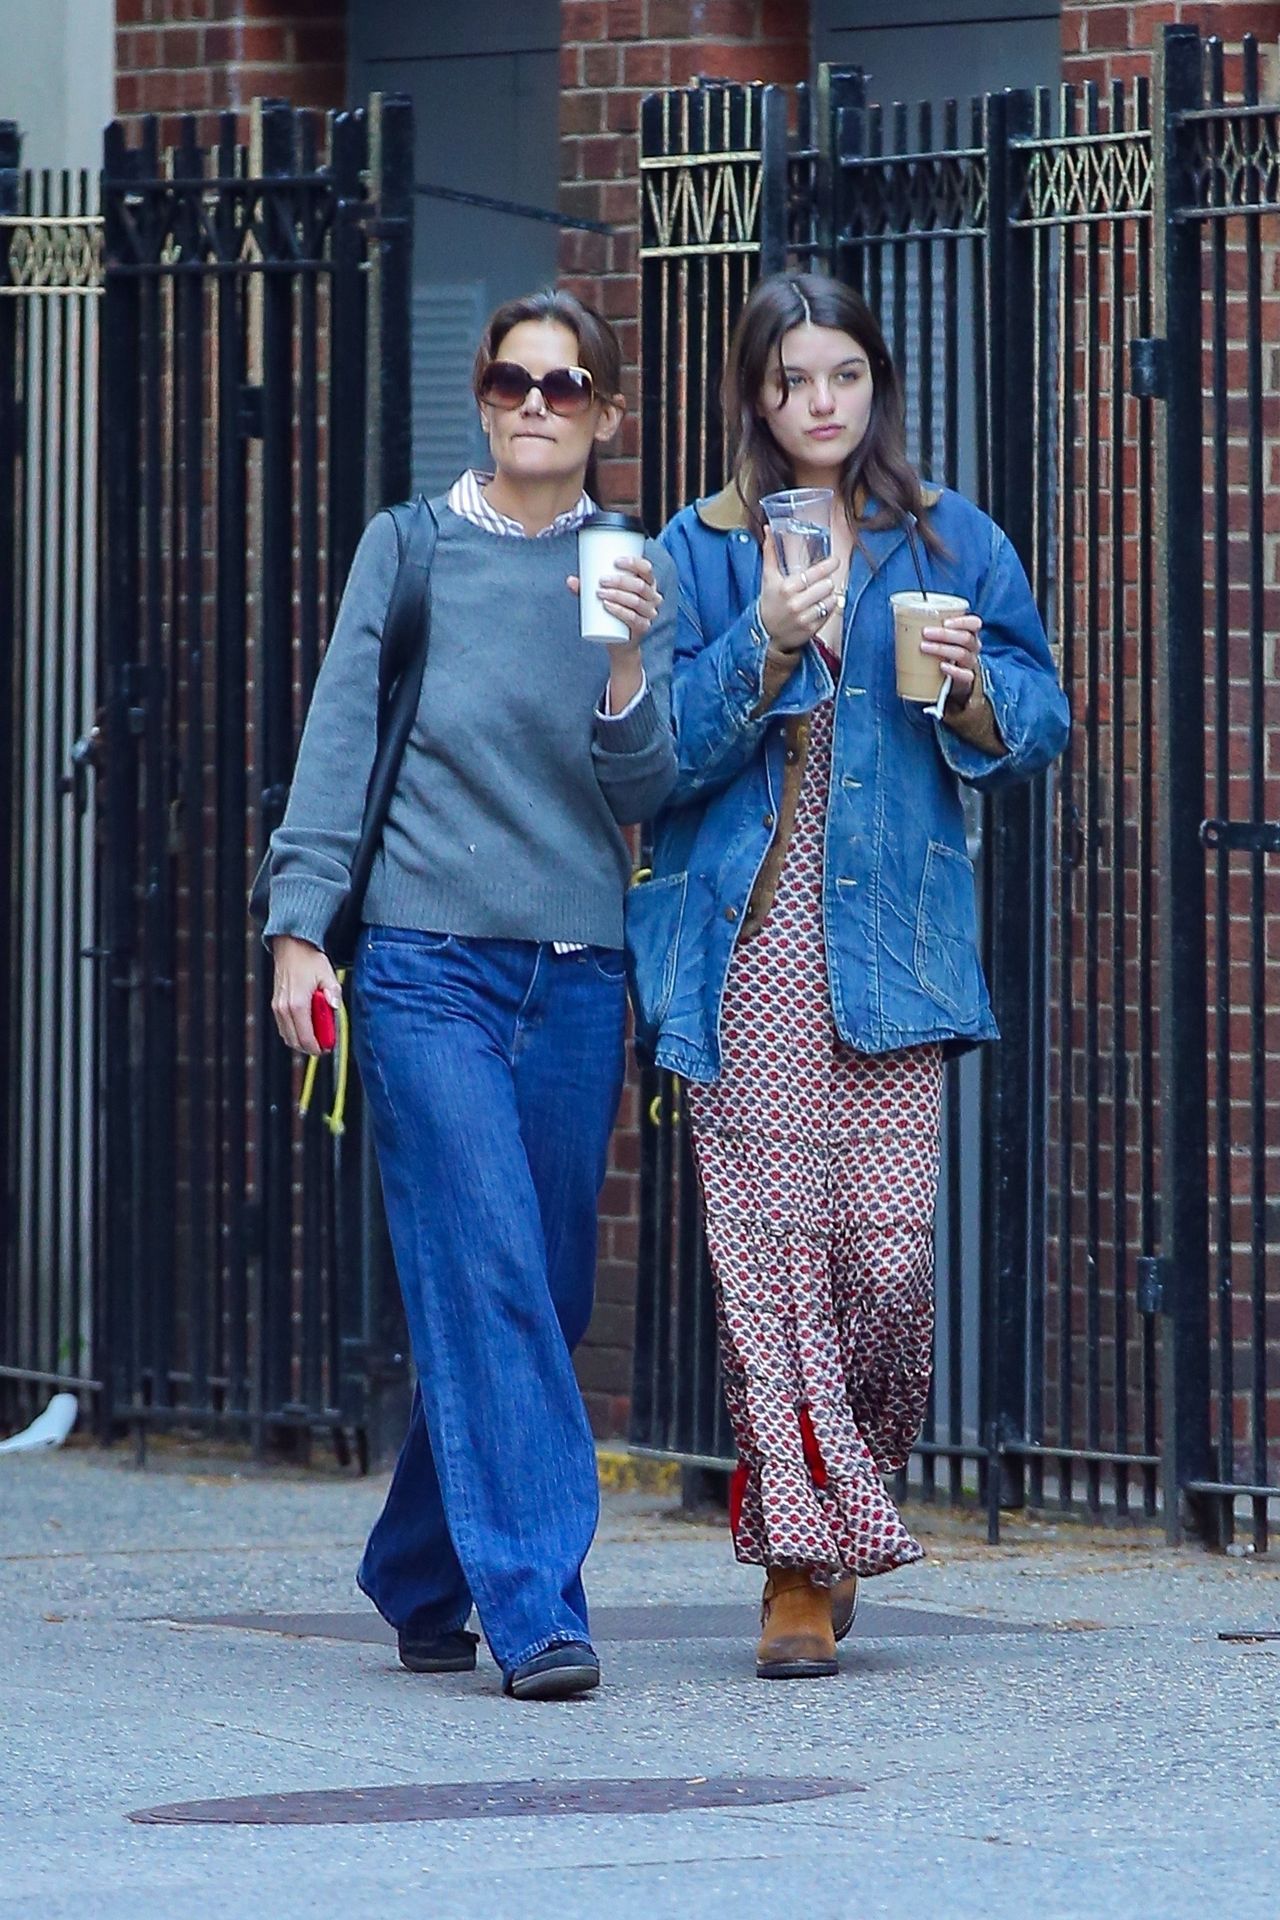 Katie Holmes and Suri Cruise "caught" in New York